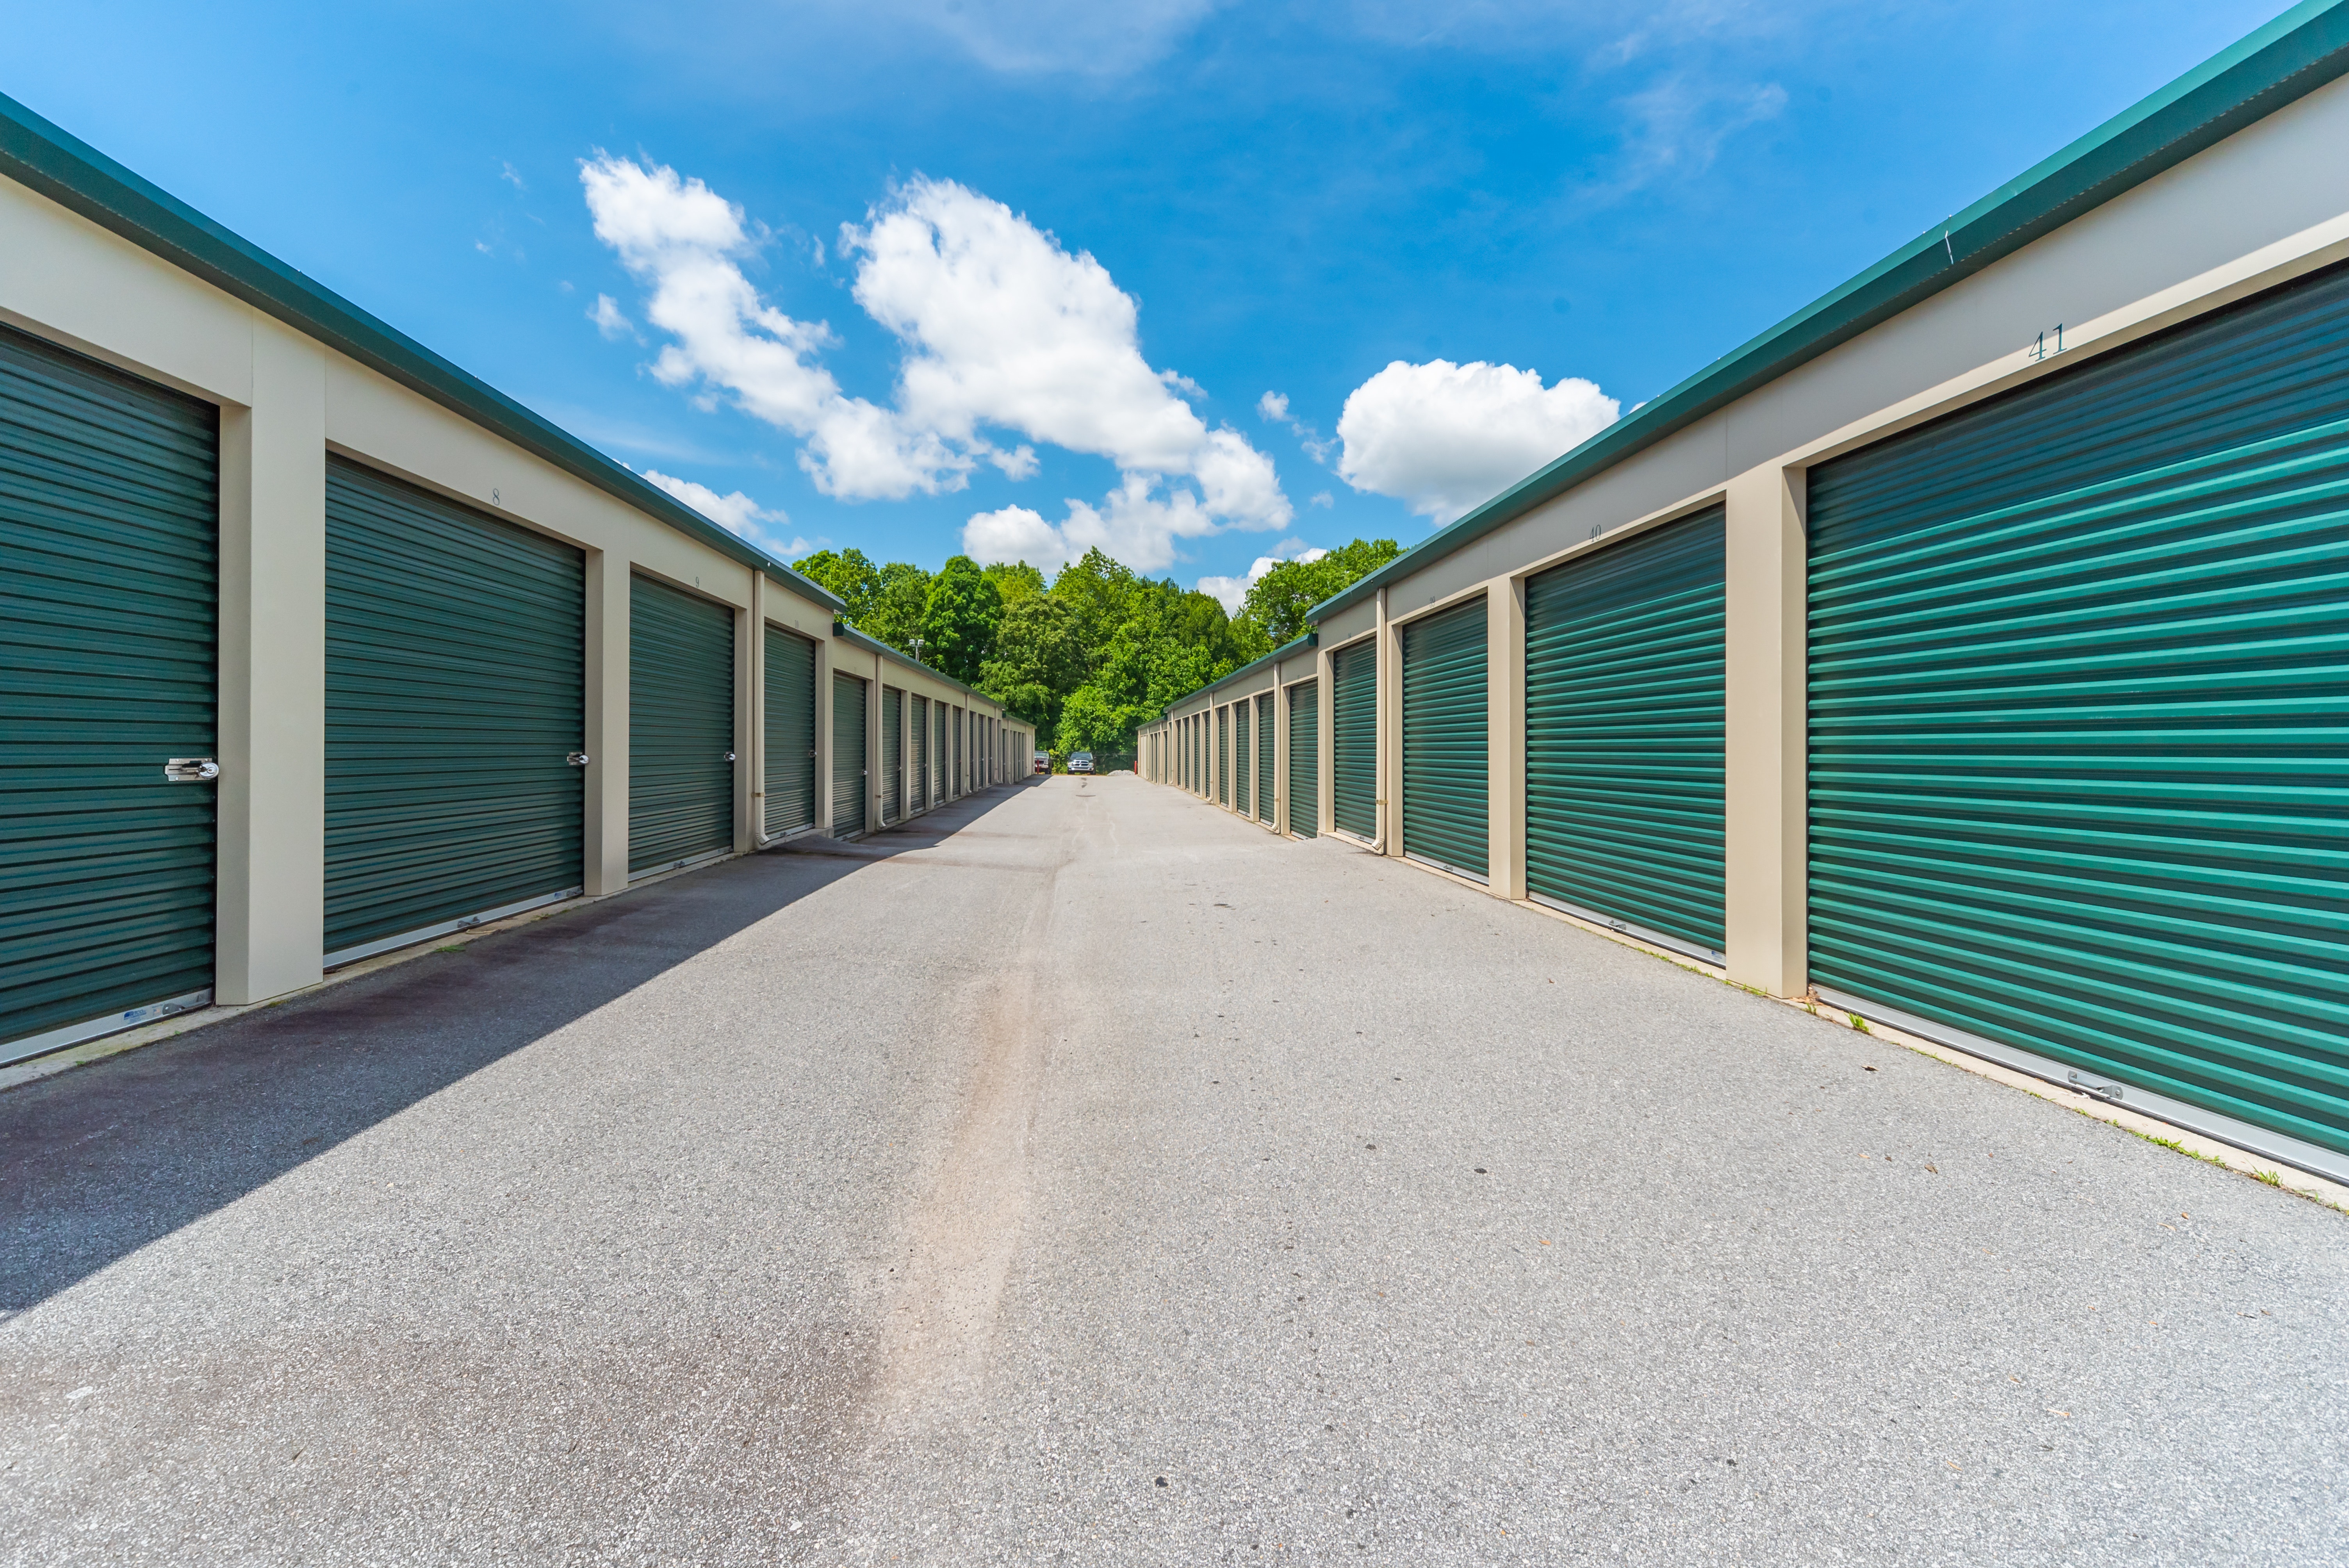 4 REITs To Gain Exposure To Growing Self-Storage Real Estate Market